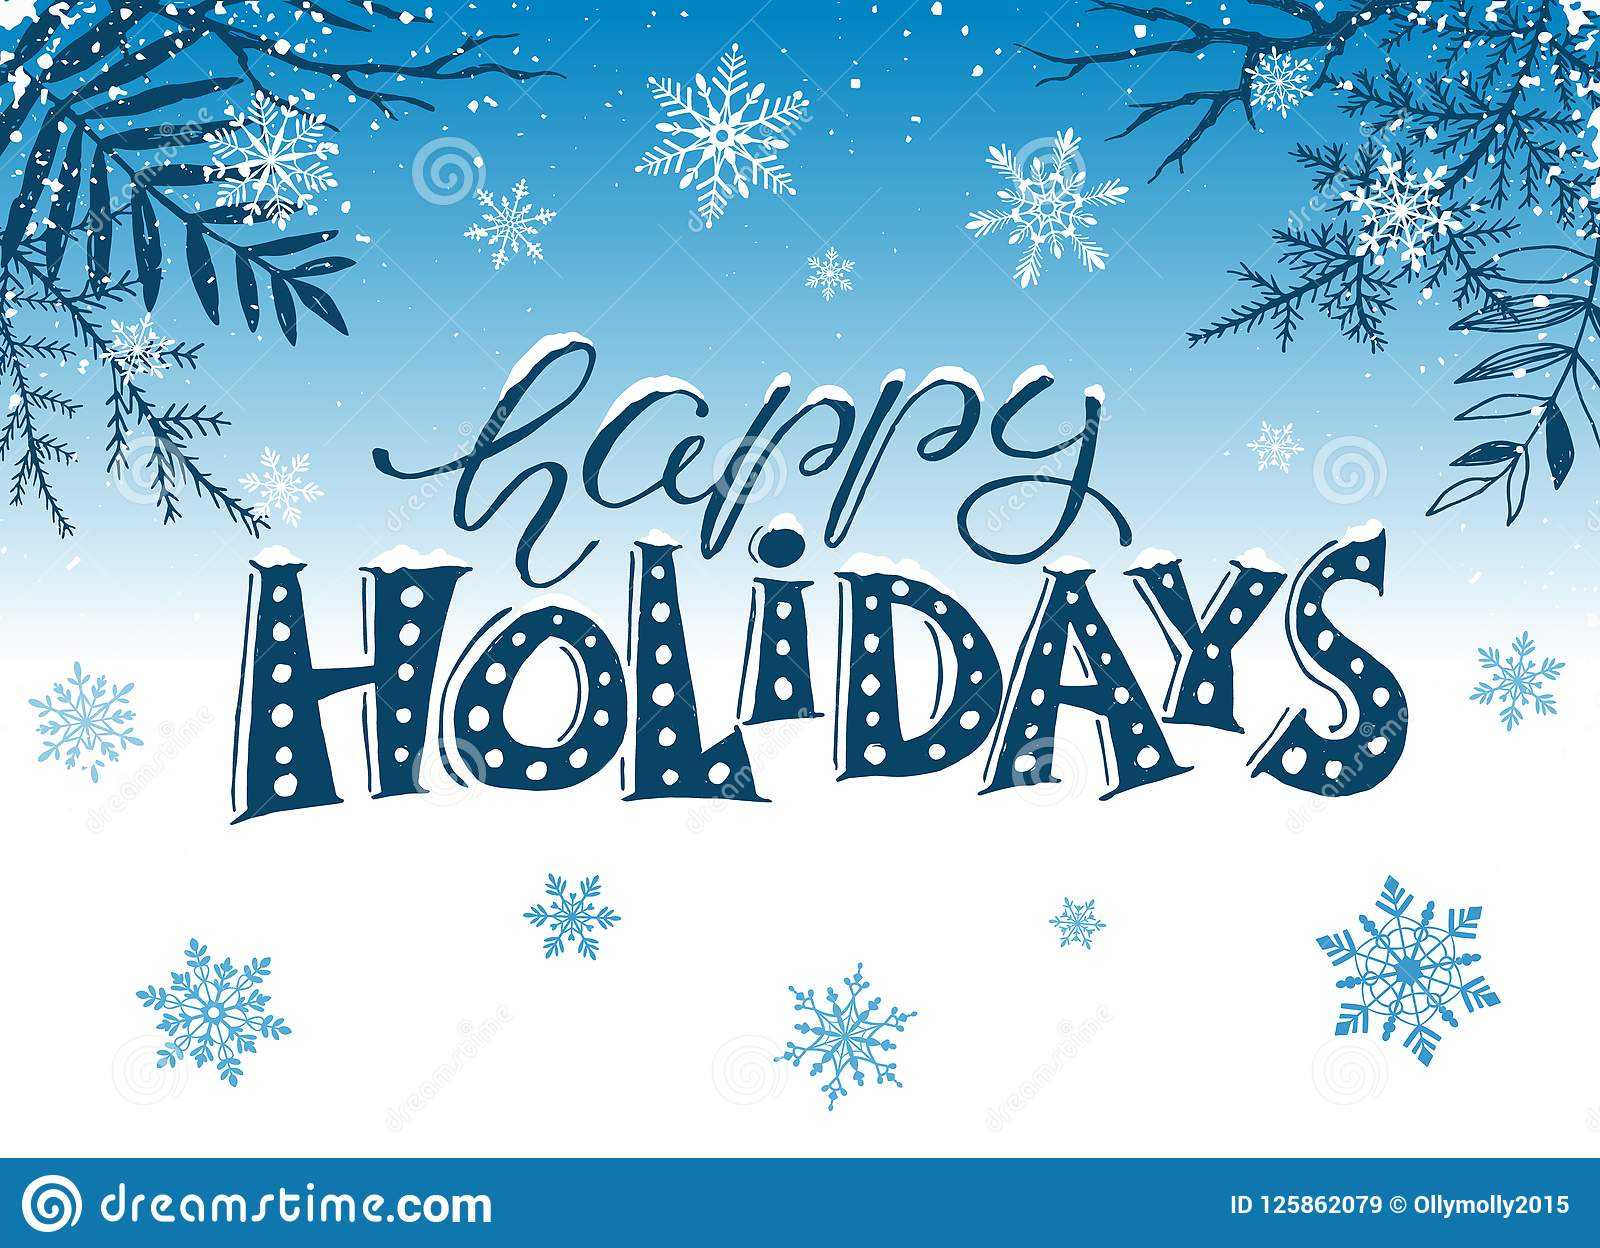 Happy Holidays Greeting Card Stock Vector – Illustration Of Regarding Happy Holidays Card Template